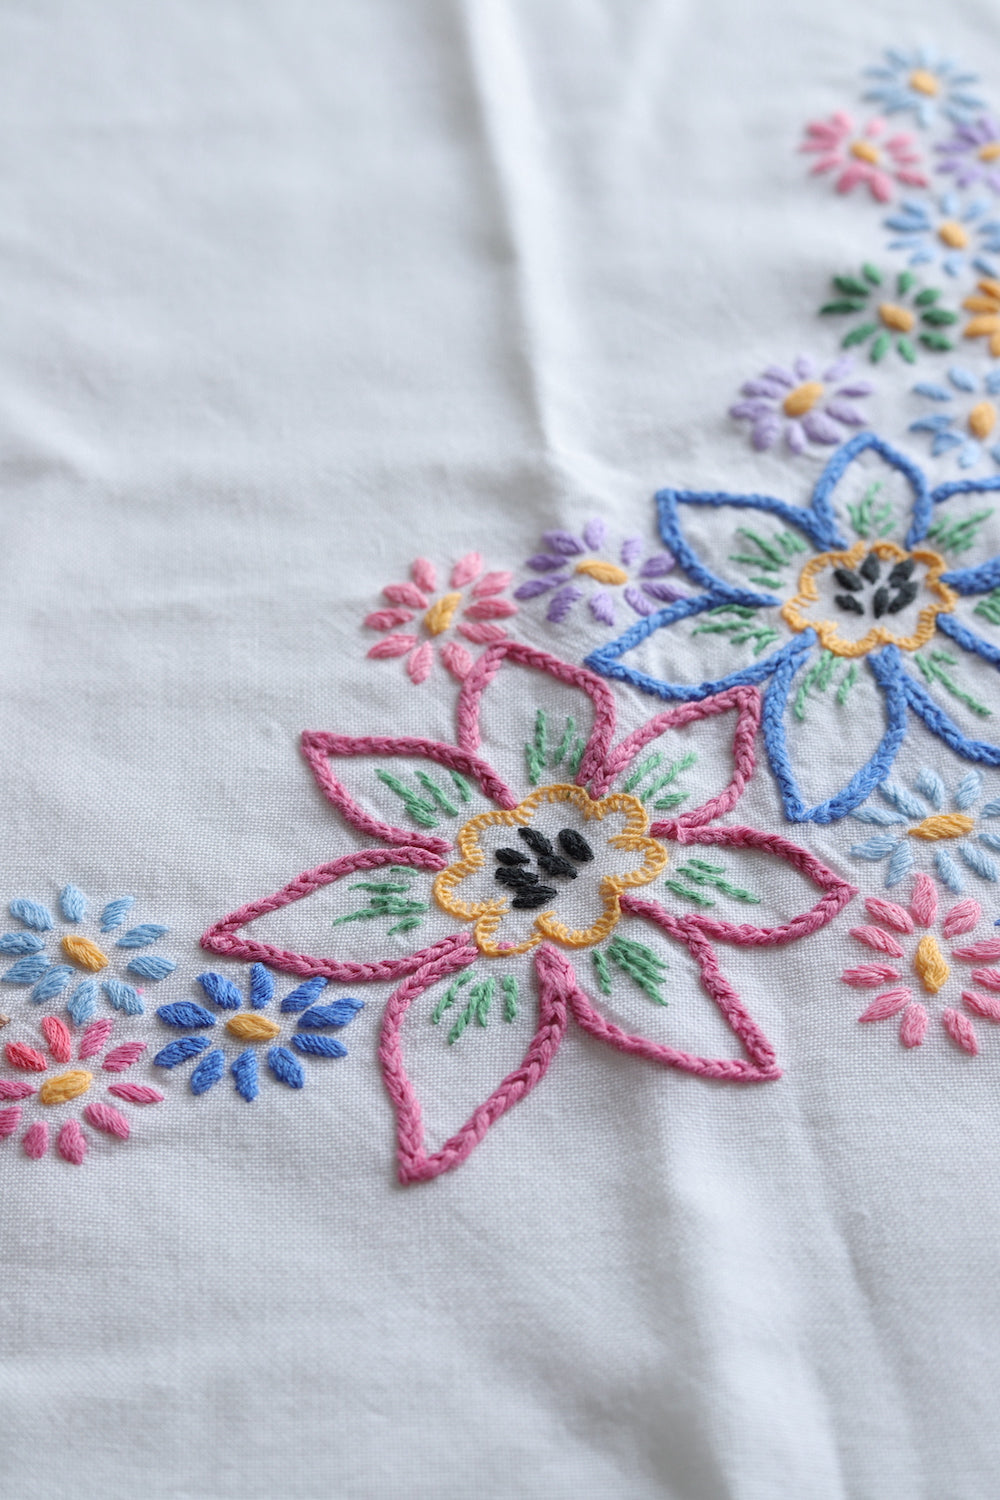 Vintage floral embroidered white table cloth, square approx 1mx1m